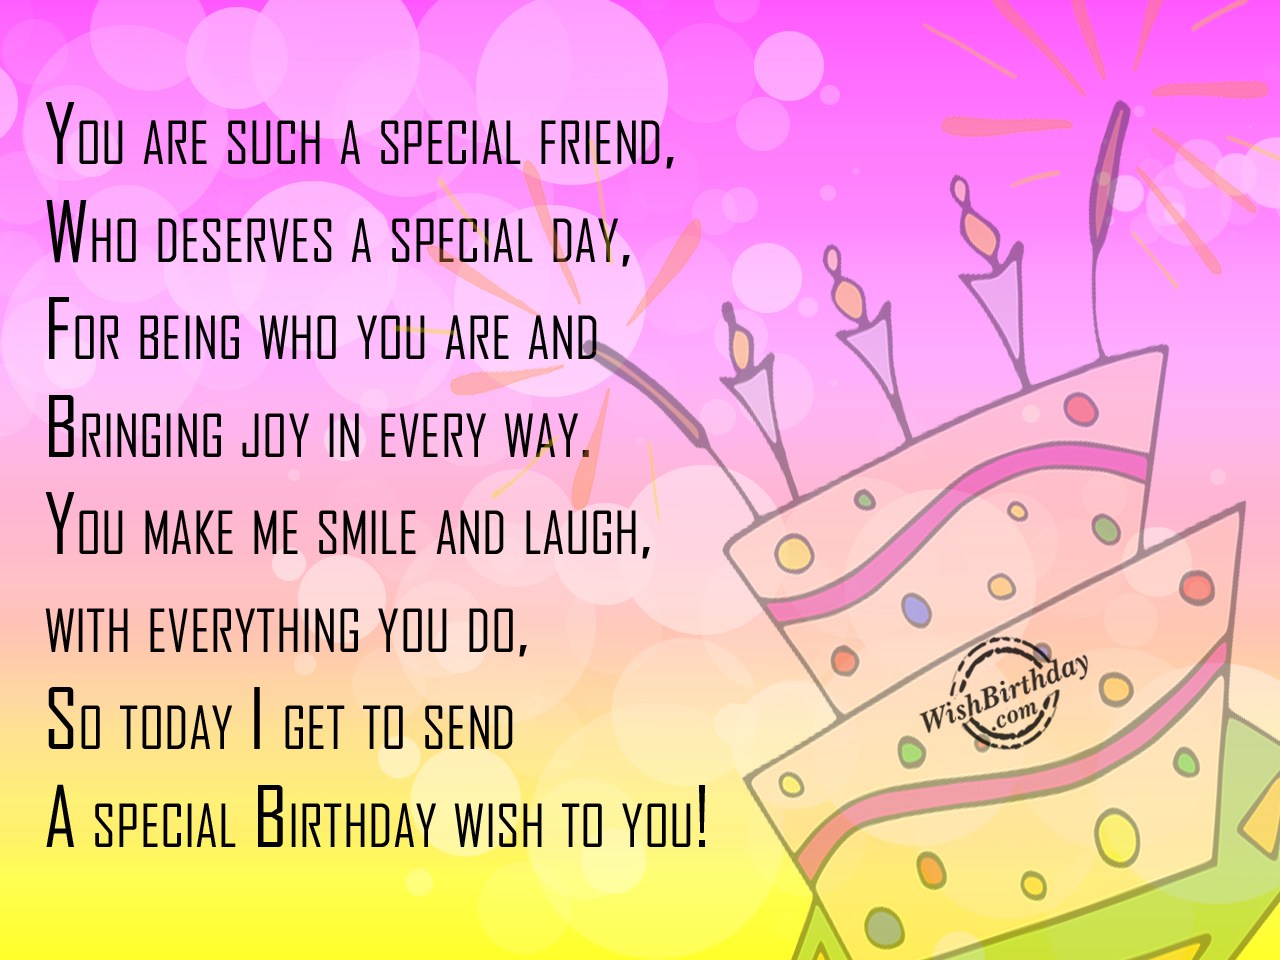 Birthday Wishes for Best Friend - Birthday Images, Pictures